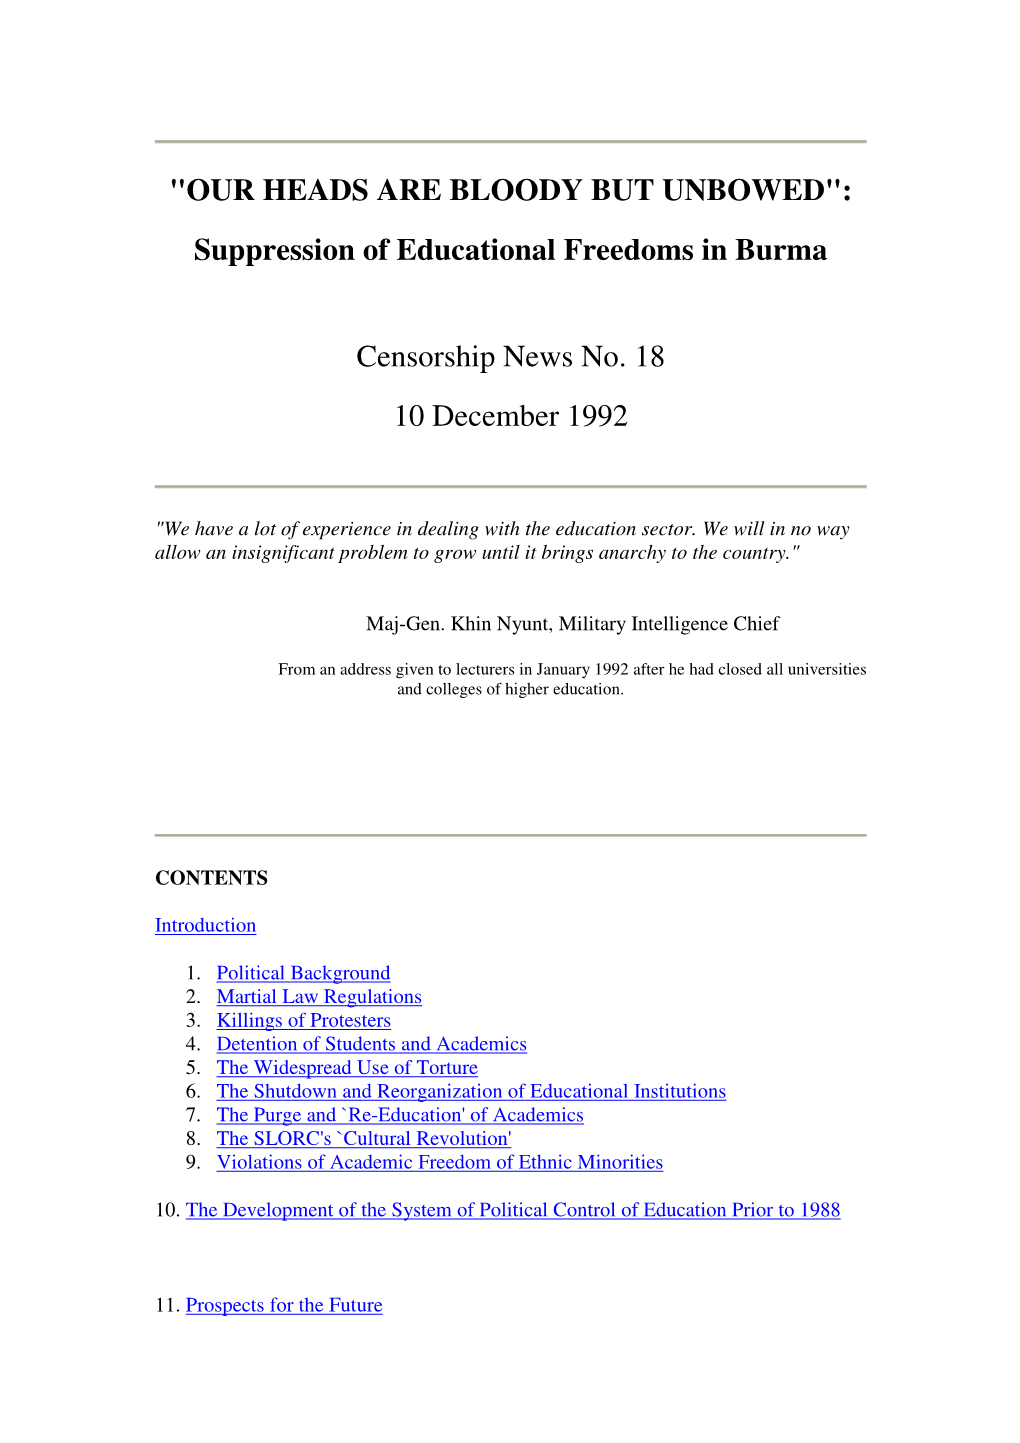 Suppression of Educational Freedoms in Burma Censorship